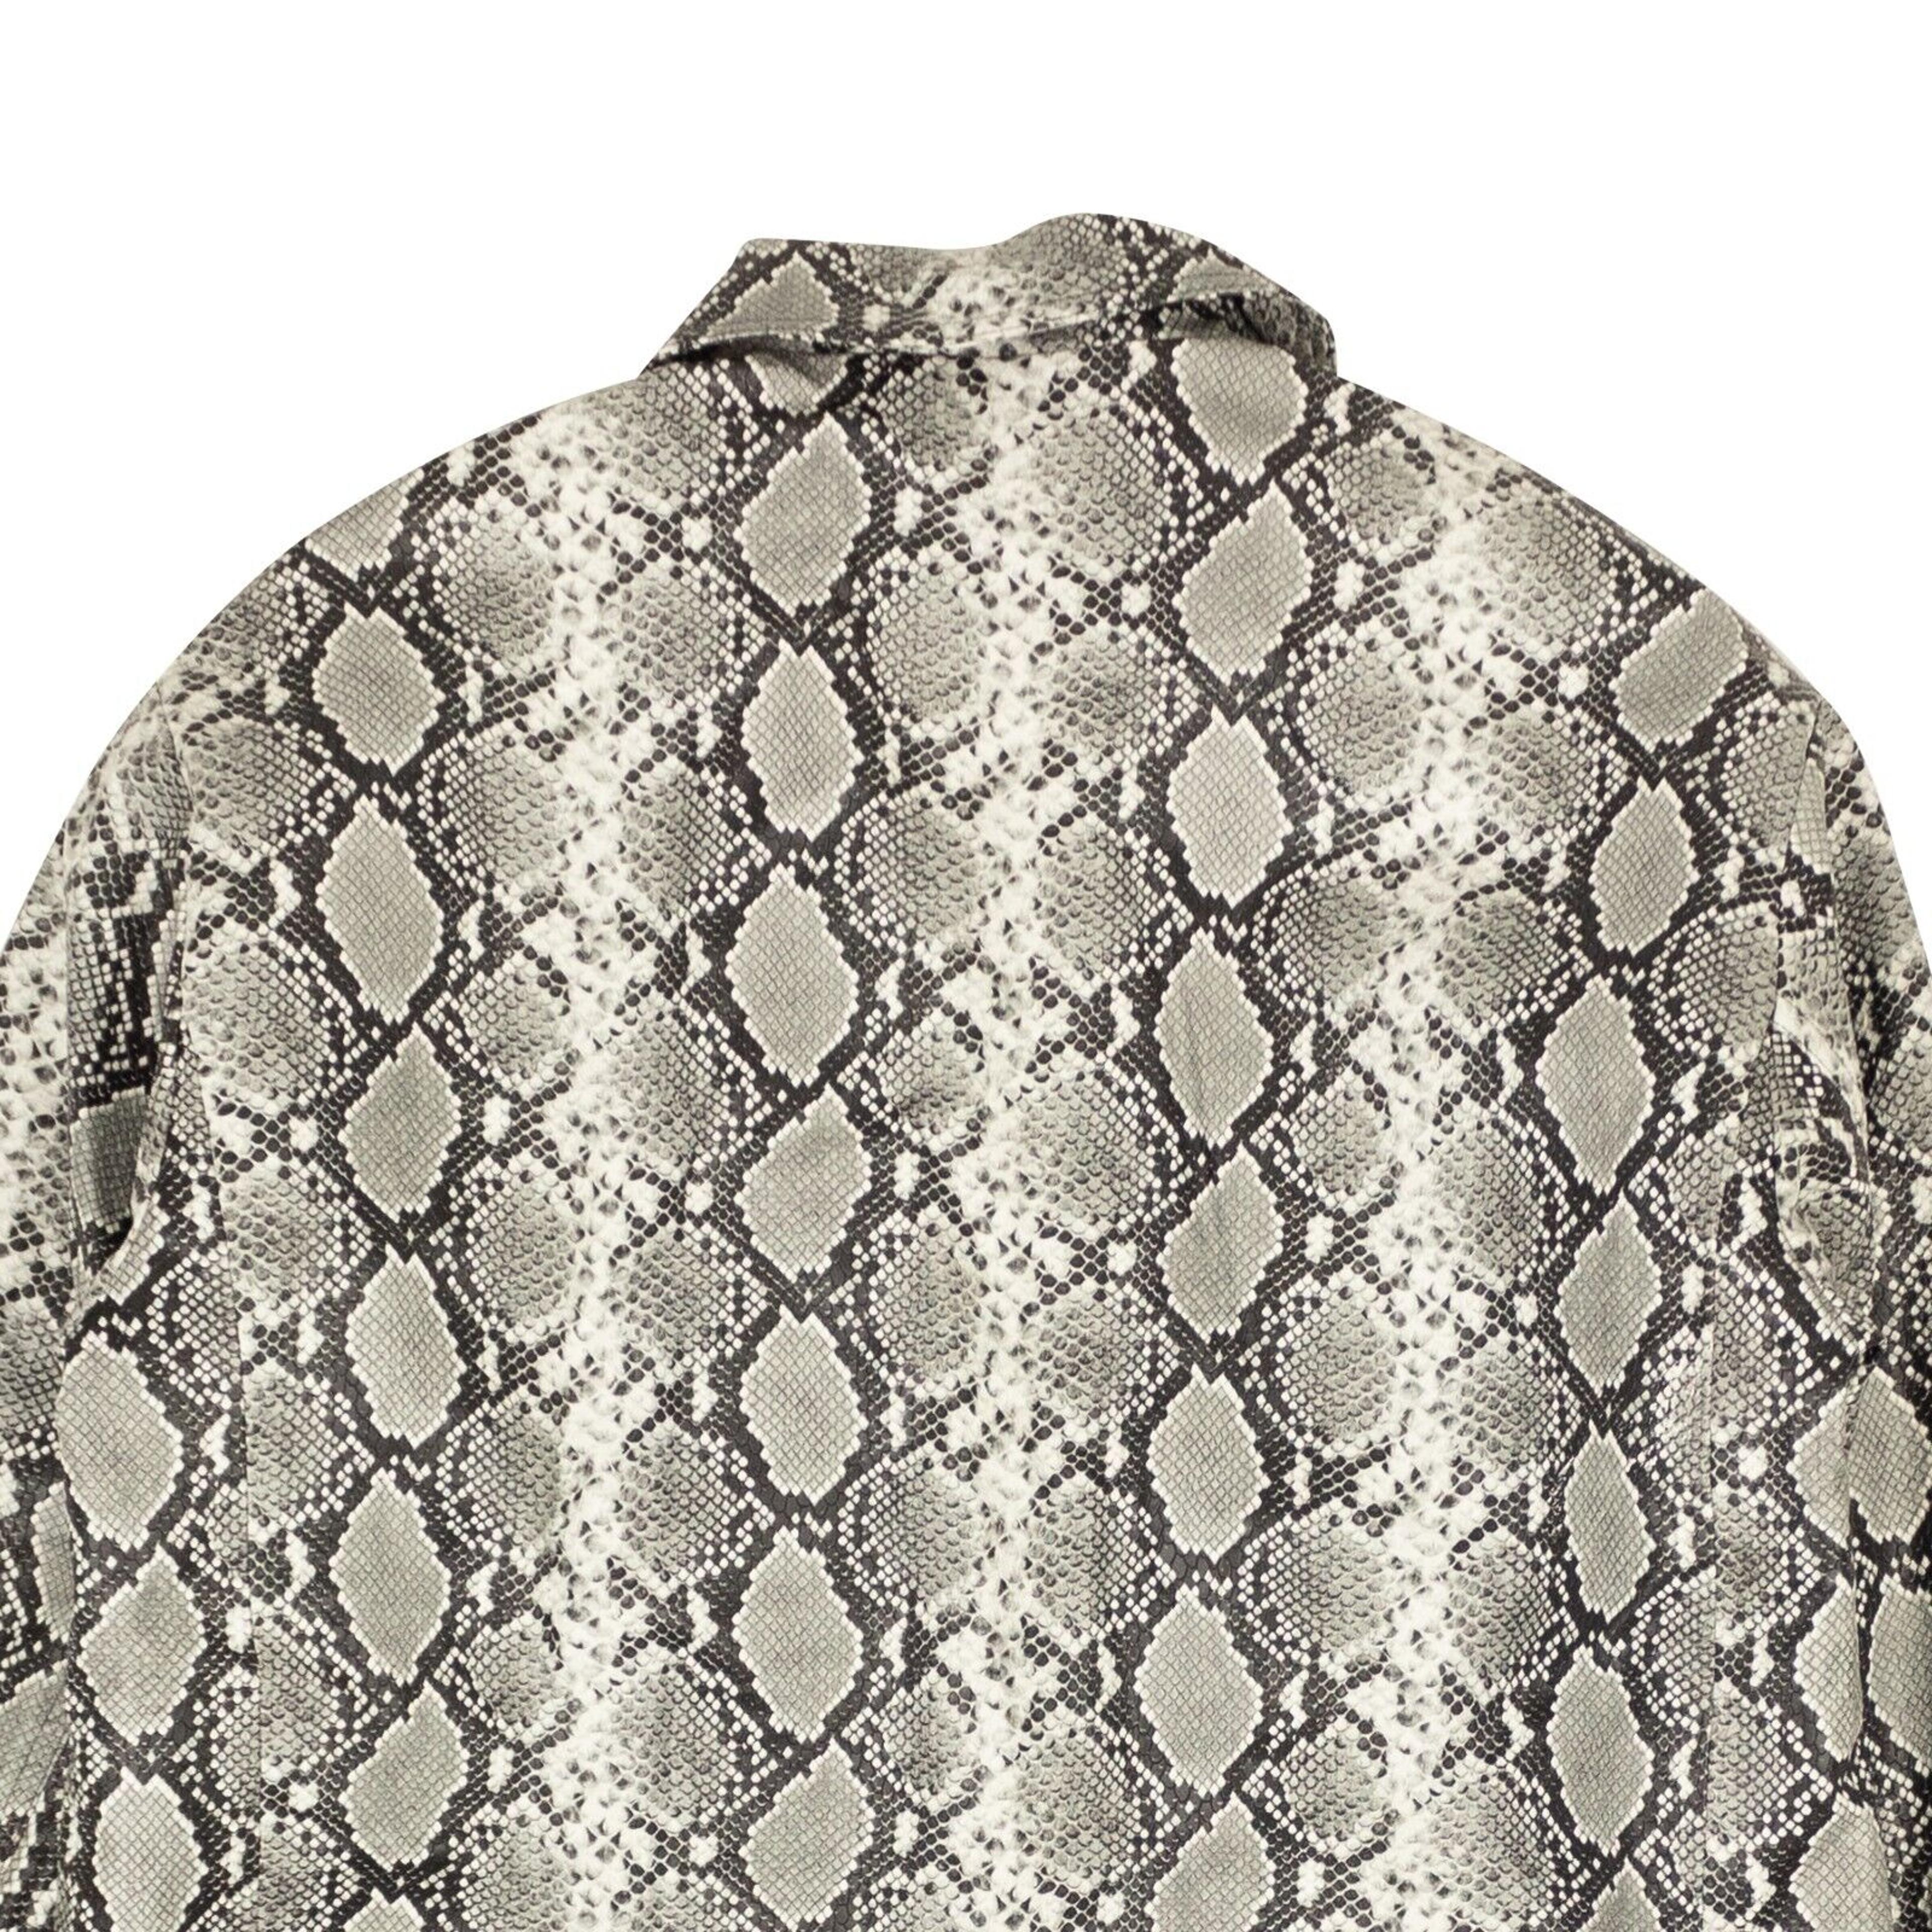 Alternate View 3 of Black And White Snake Print Faux Jacket